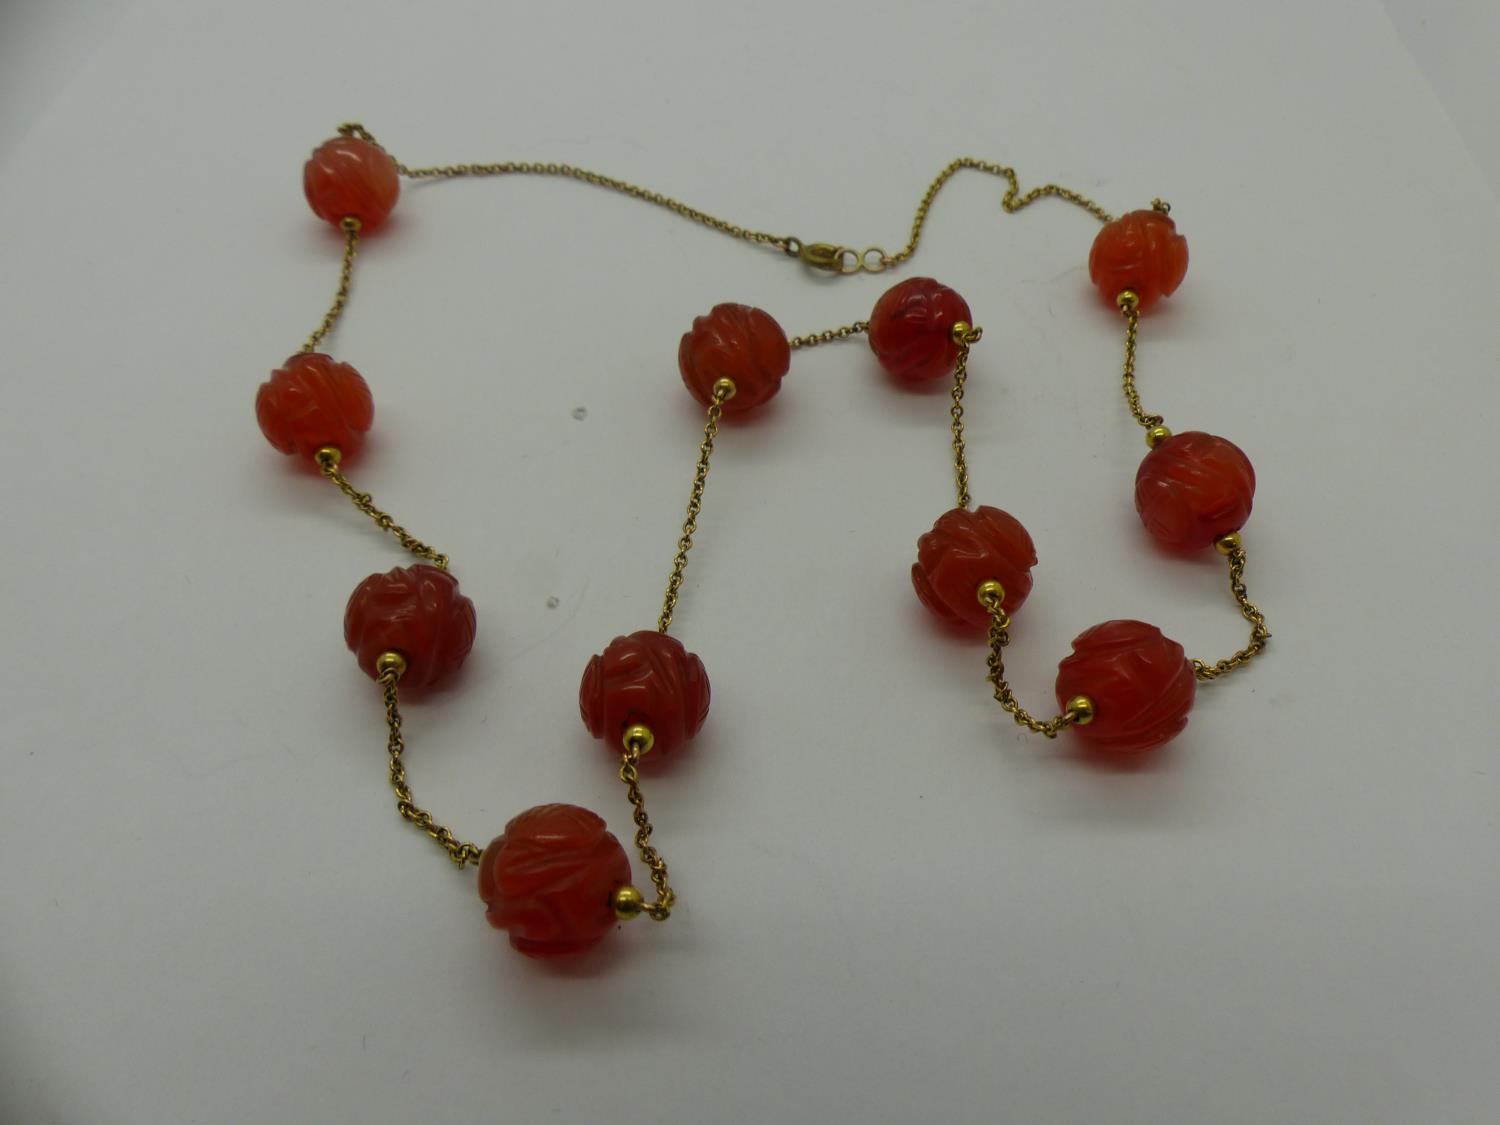 Unusual 19th century unmarked gold necklace, set with eleven carved carnelian beads, L: 63 cm. UK